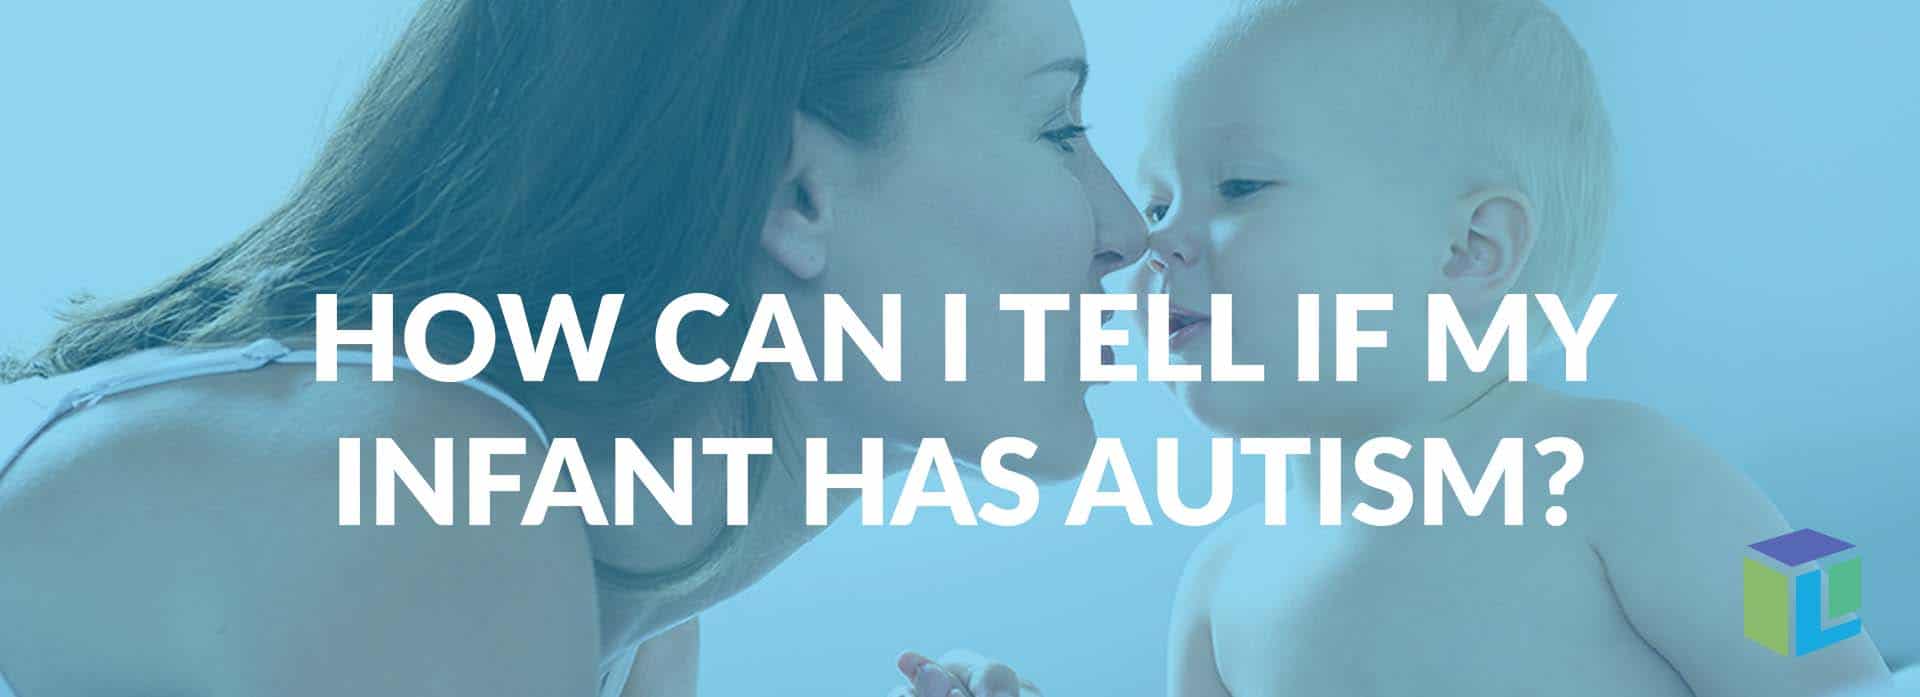 How Can I Tell If My Infant Has Autism?